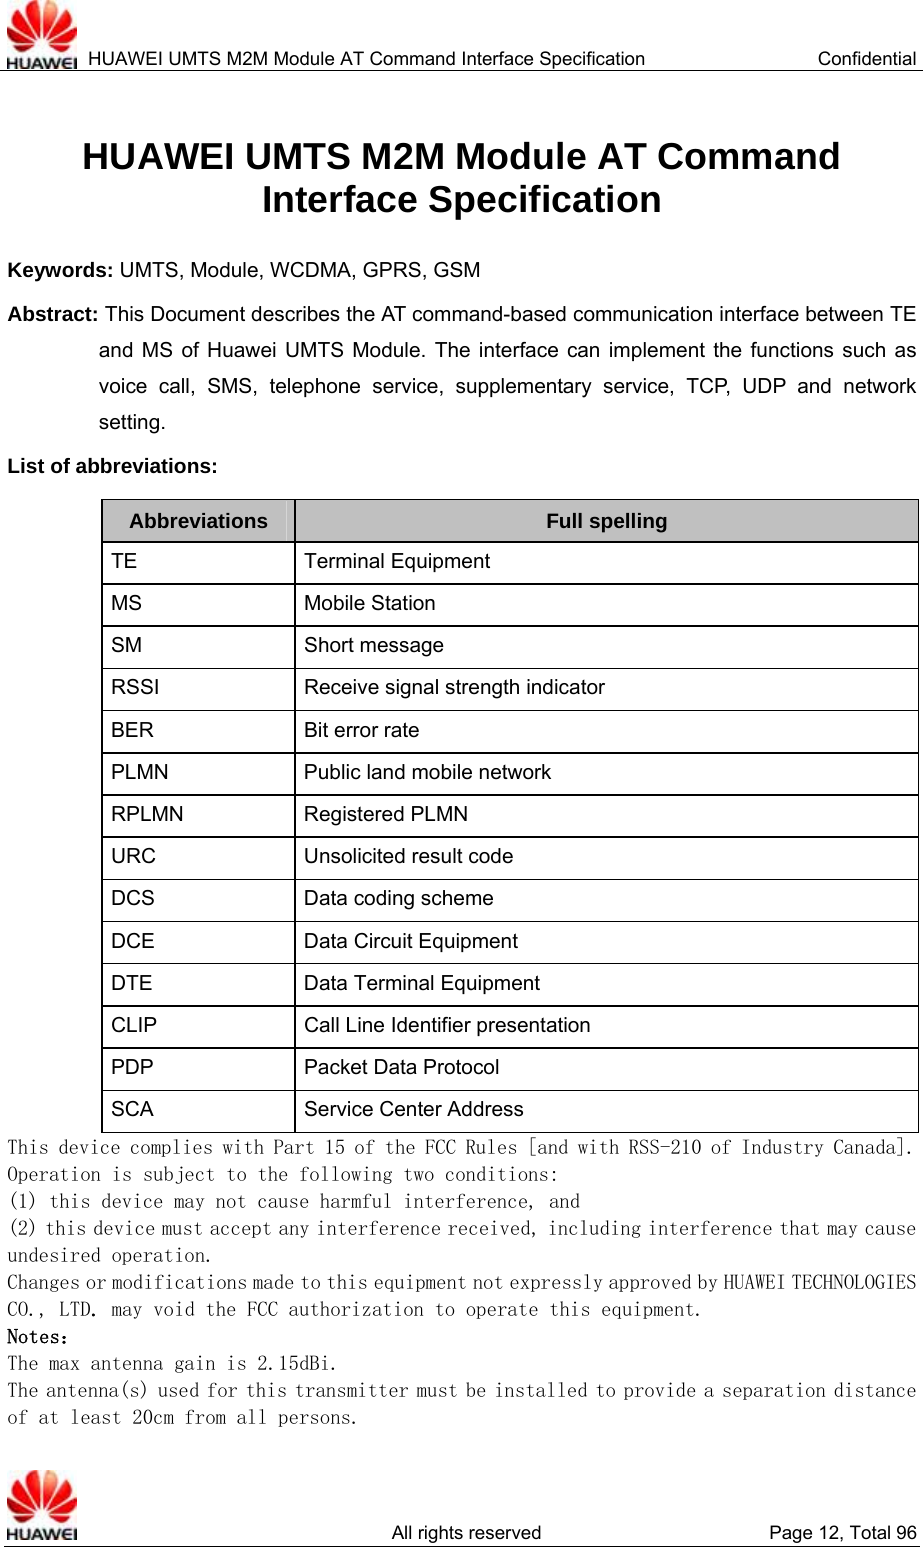  HUAWEI UMTS M2M Module AT Command Interface Specification  Confidential   All rights reserved  Page 12, Total 96 HUAWEI UMTS M2M Module AT Command   Interface Specification Keywords: UMTS, Module, WCDMA, GPRS, GSM Abstract: This Document describes the AT command-based communication interface between TE and MS of Huawei UMTS Module. The interface can implement the functions such as voice call, SMS, telephone service, supplementary service, TCP, UDP and network setting.   List of abbreviations:   Abbreviations  Full spelling TE Terminal Equipment MS Mobile Station SM Short message RSSI  Receive signal strength indicator BER Bit error rate PLMN  Public land mobile network RPLMN Registered PLMN URC  Unsolicited result code DCS  Data coding scheme DCE  Data Circuit Equipment DTE  Data Terminal Equipment CLIP  Call Line Identifier presentation PDP Packet Data Protocol SCA Service Center Address This device complies with Part 15 of the FCC Rules [and with RSS-210 of Industry Canada]. Operation is subject to the following two conditions: (1) this device may not cause harmful interference, and  (2) this device must accept any interference received, including interference that may cause undesired operation. Changes or modifications made to this equipment not expressly approved by HUAWEI TECHNOLOGIES CO., LTD. may void the FCC authorization to operate this equipment. Notes： The max antenna gain is 2.15dBi.  The antenna(s) used for this transmitter must be installed to provide a separation distance of at least 20cm from all persons. 